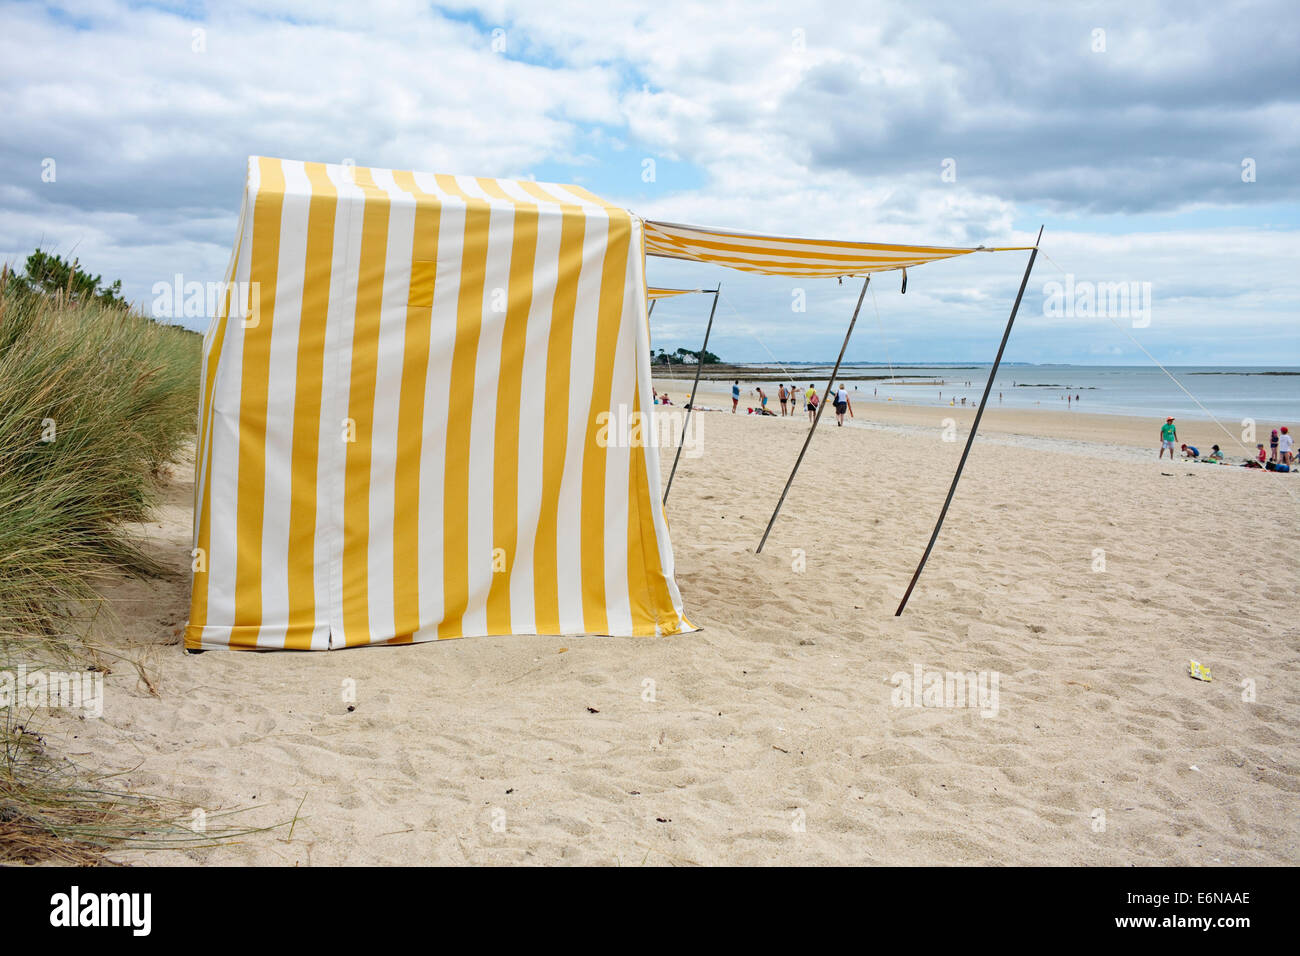 Beach shelters on Carnac Plage, Brittany, France Stock Photo